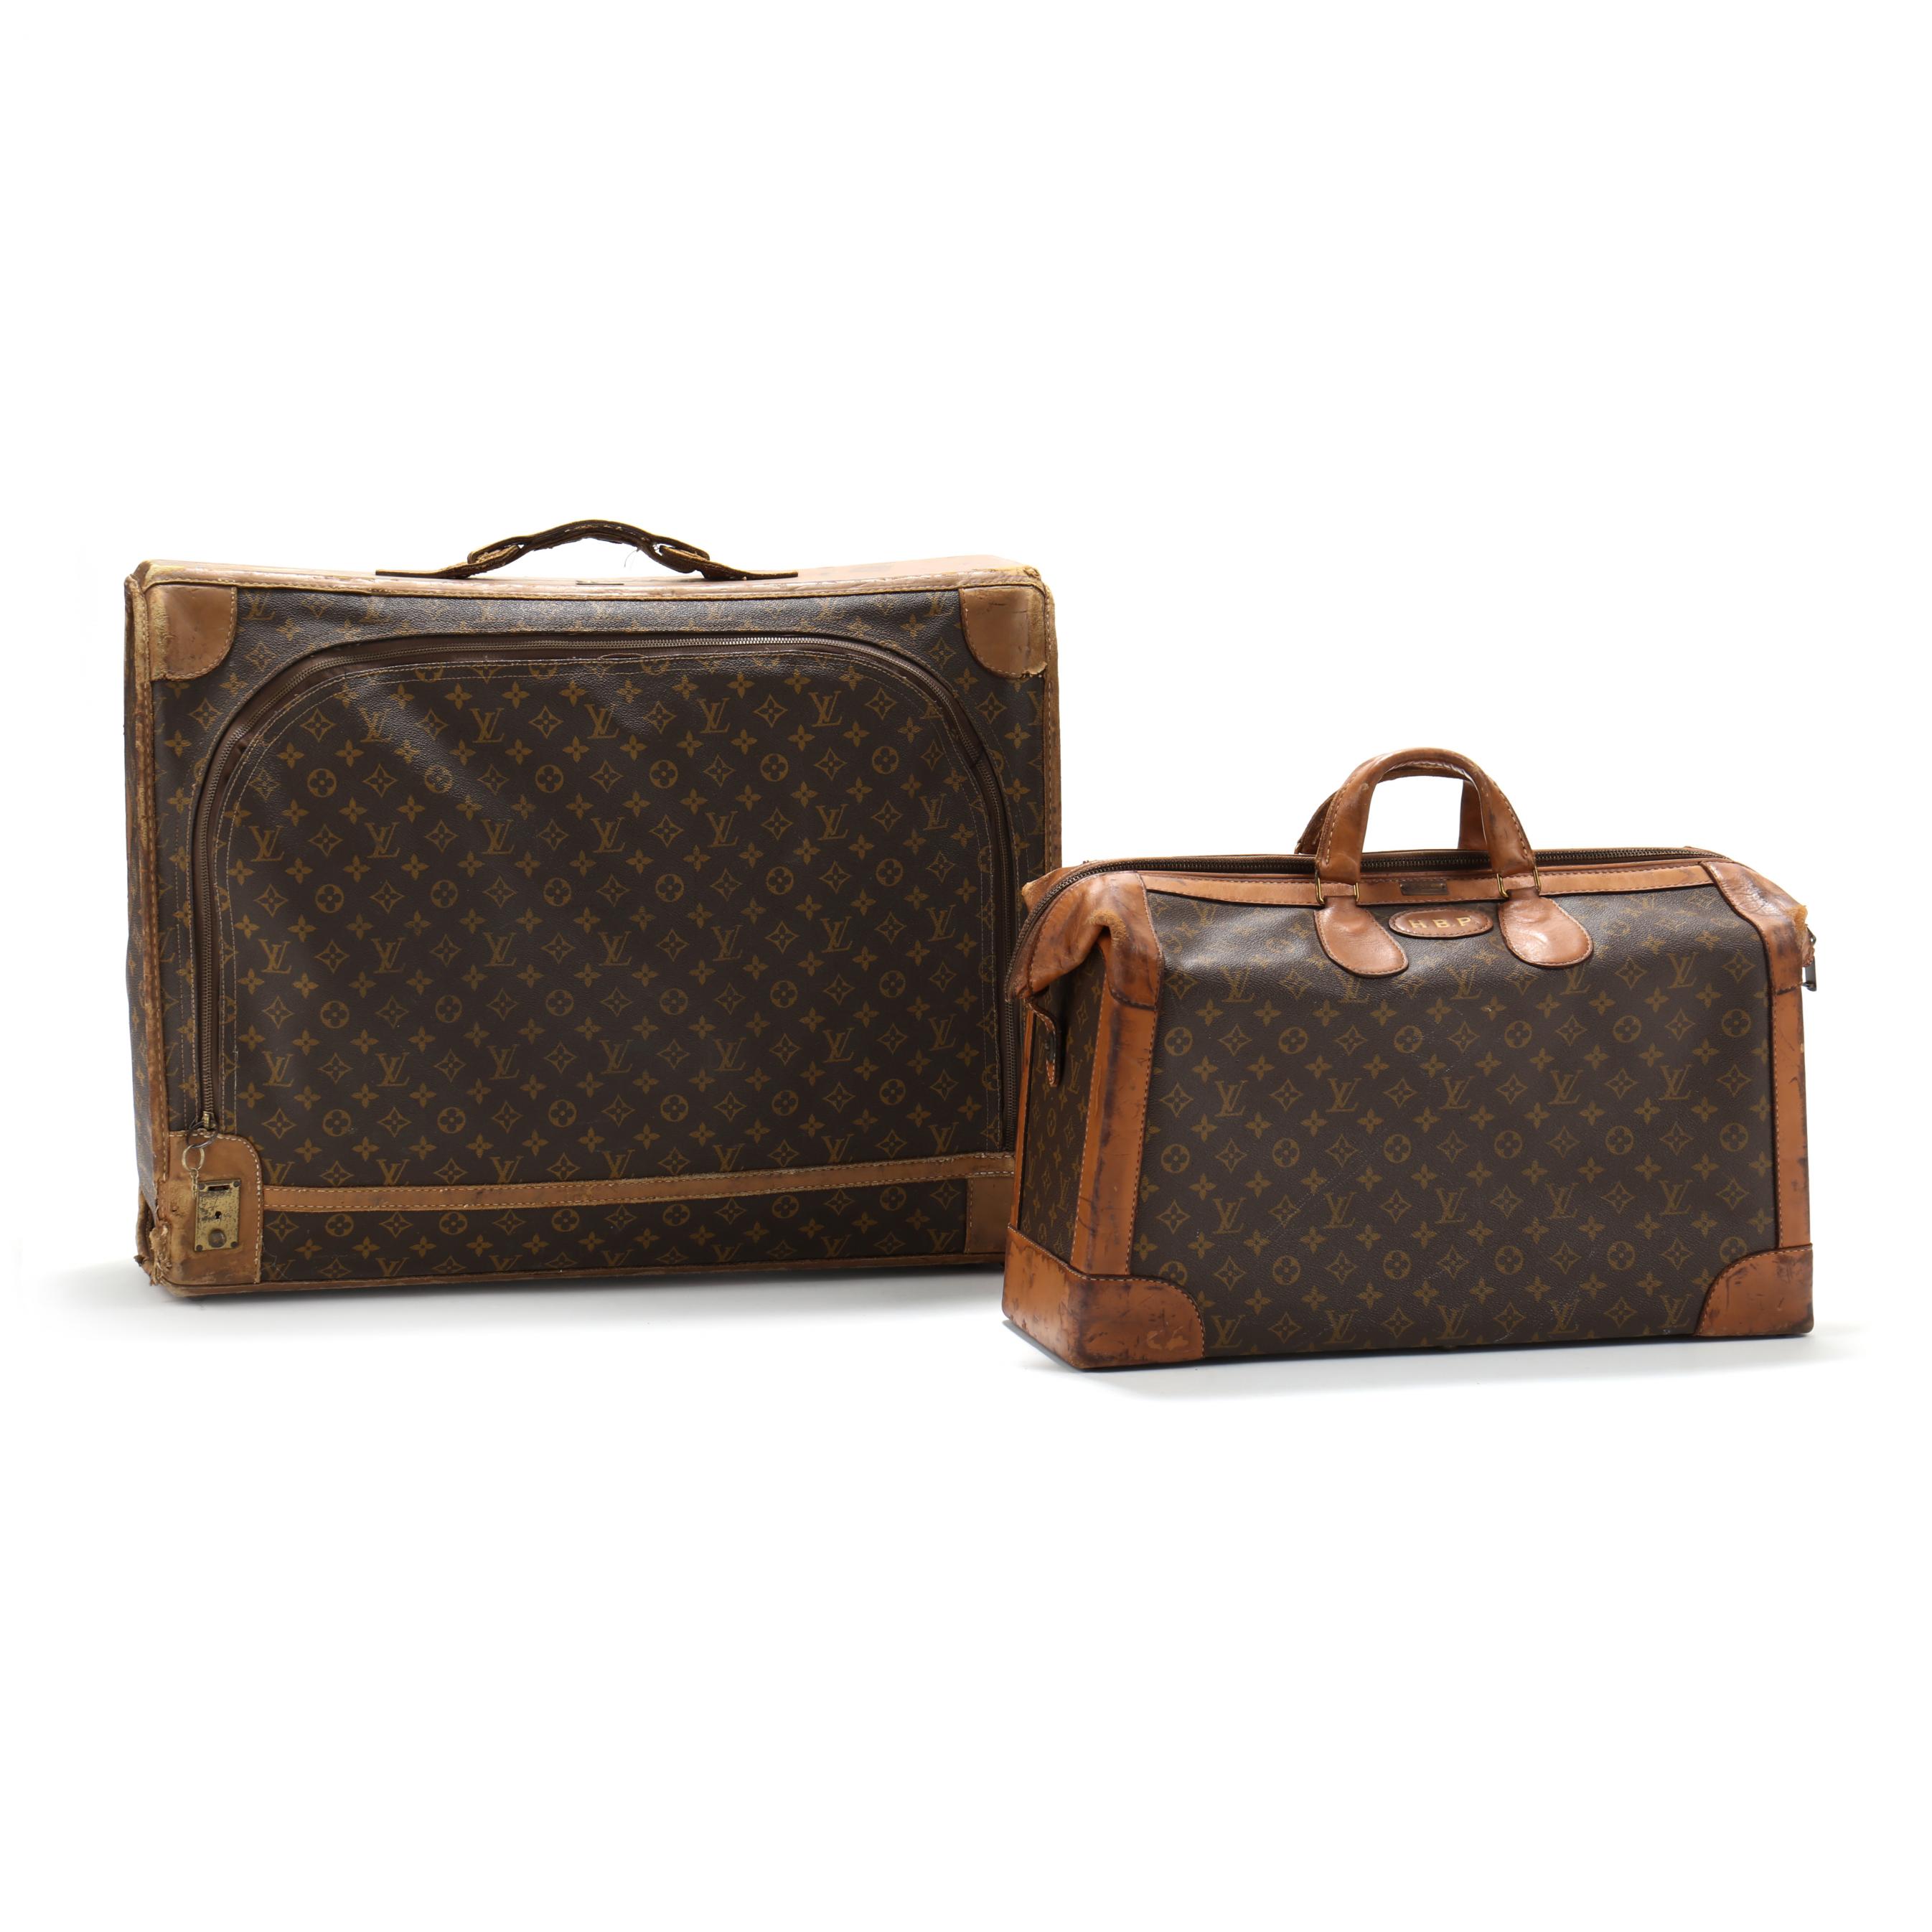 Sold at Auction: 1980s Louis Vuitton Keepall Duffel Bag, for Saks